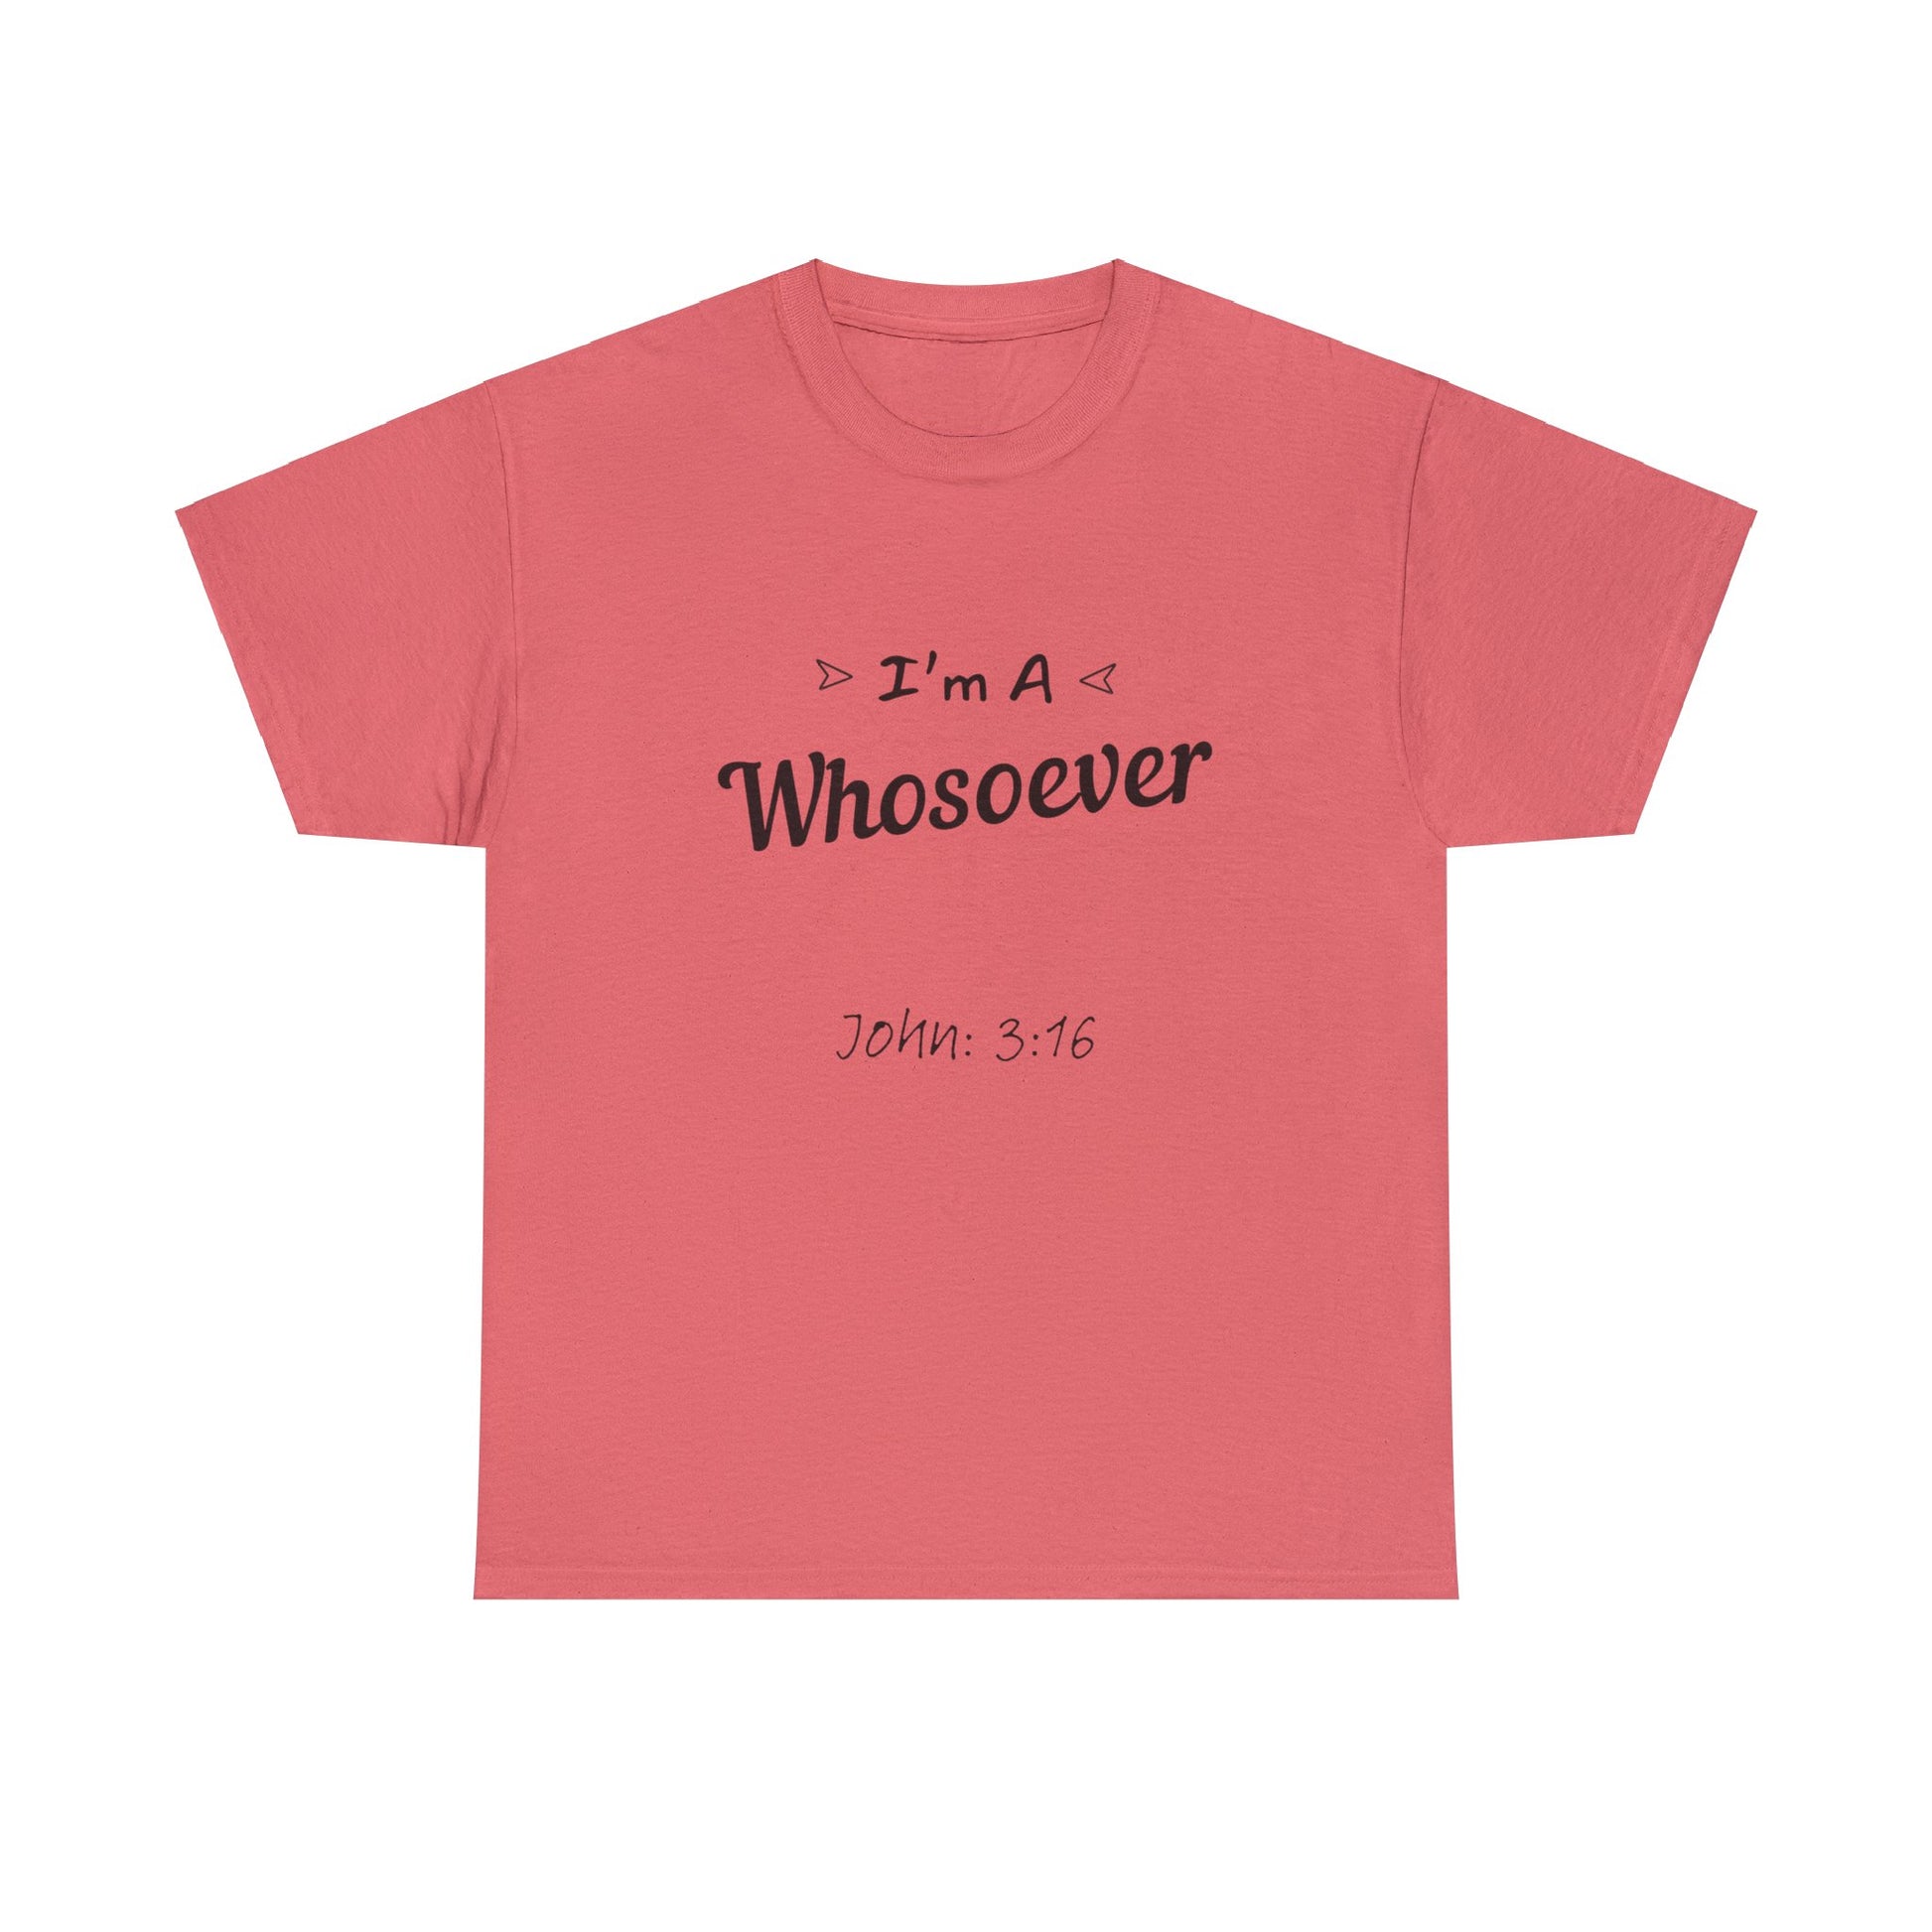 "Religious T-shirt 'I'm a Whosoever' from John 3:16 in various sizes."